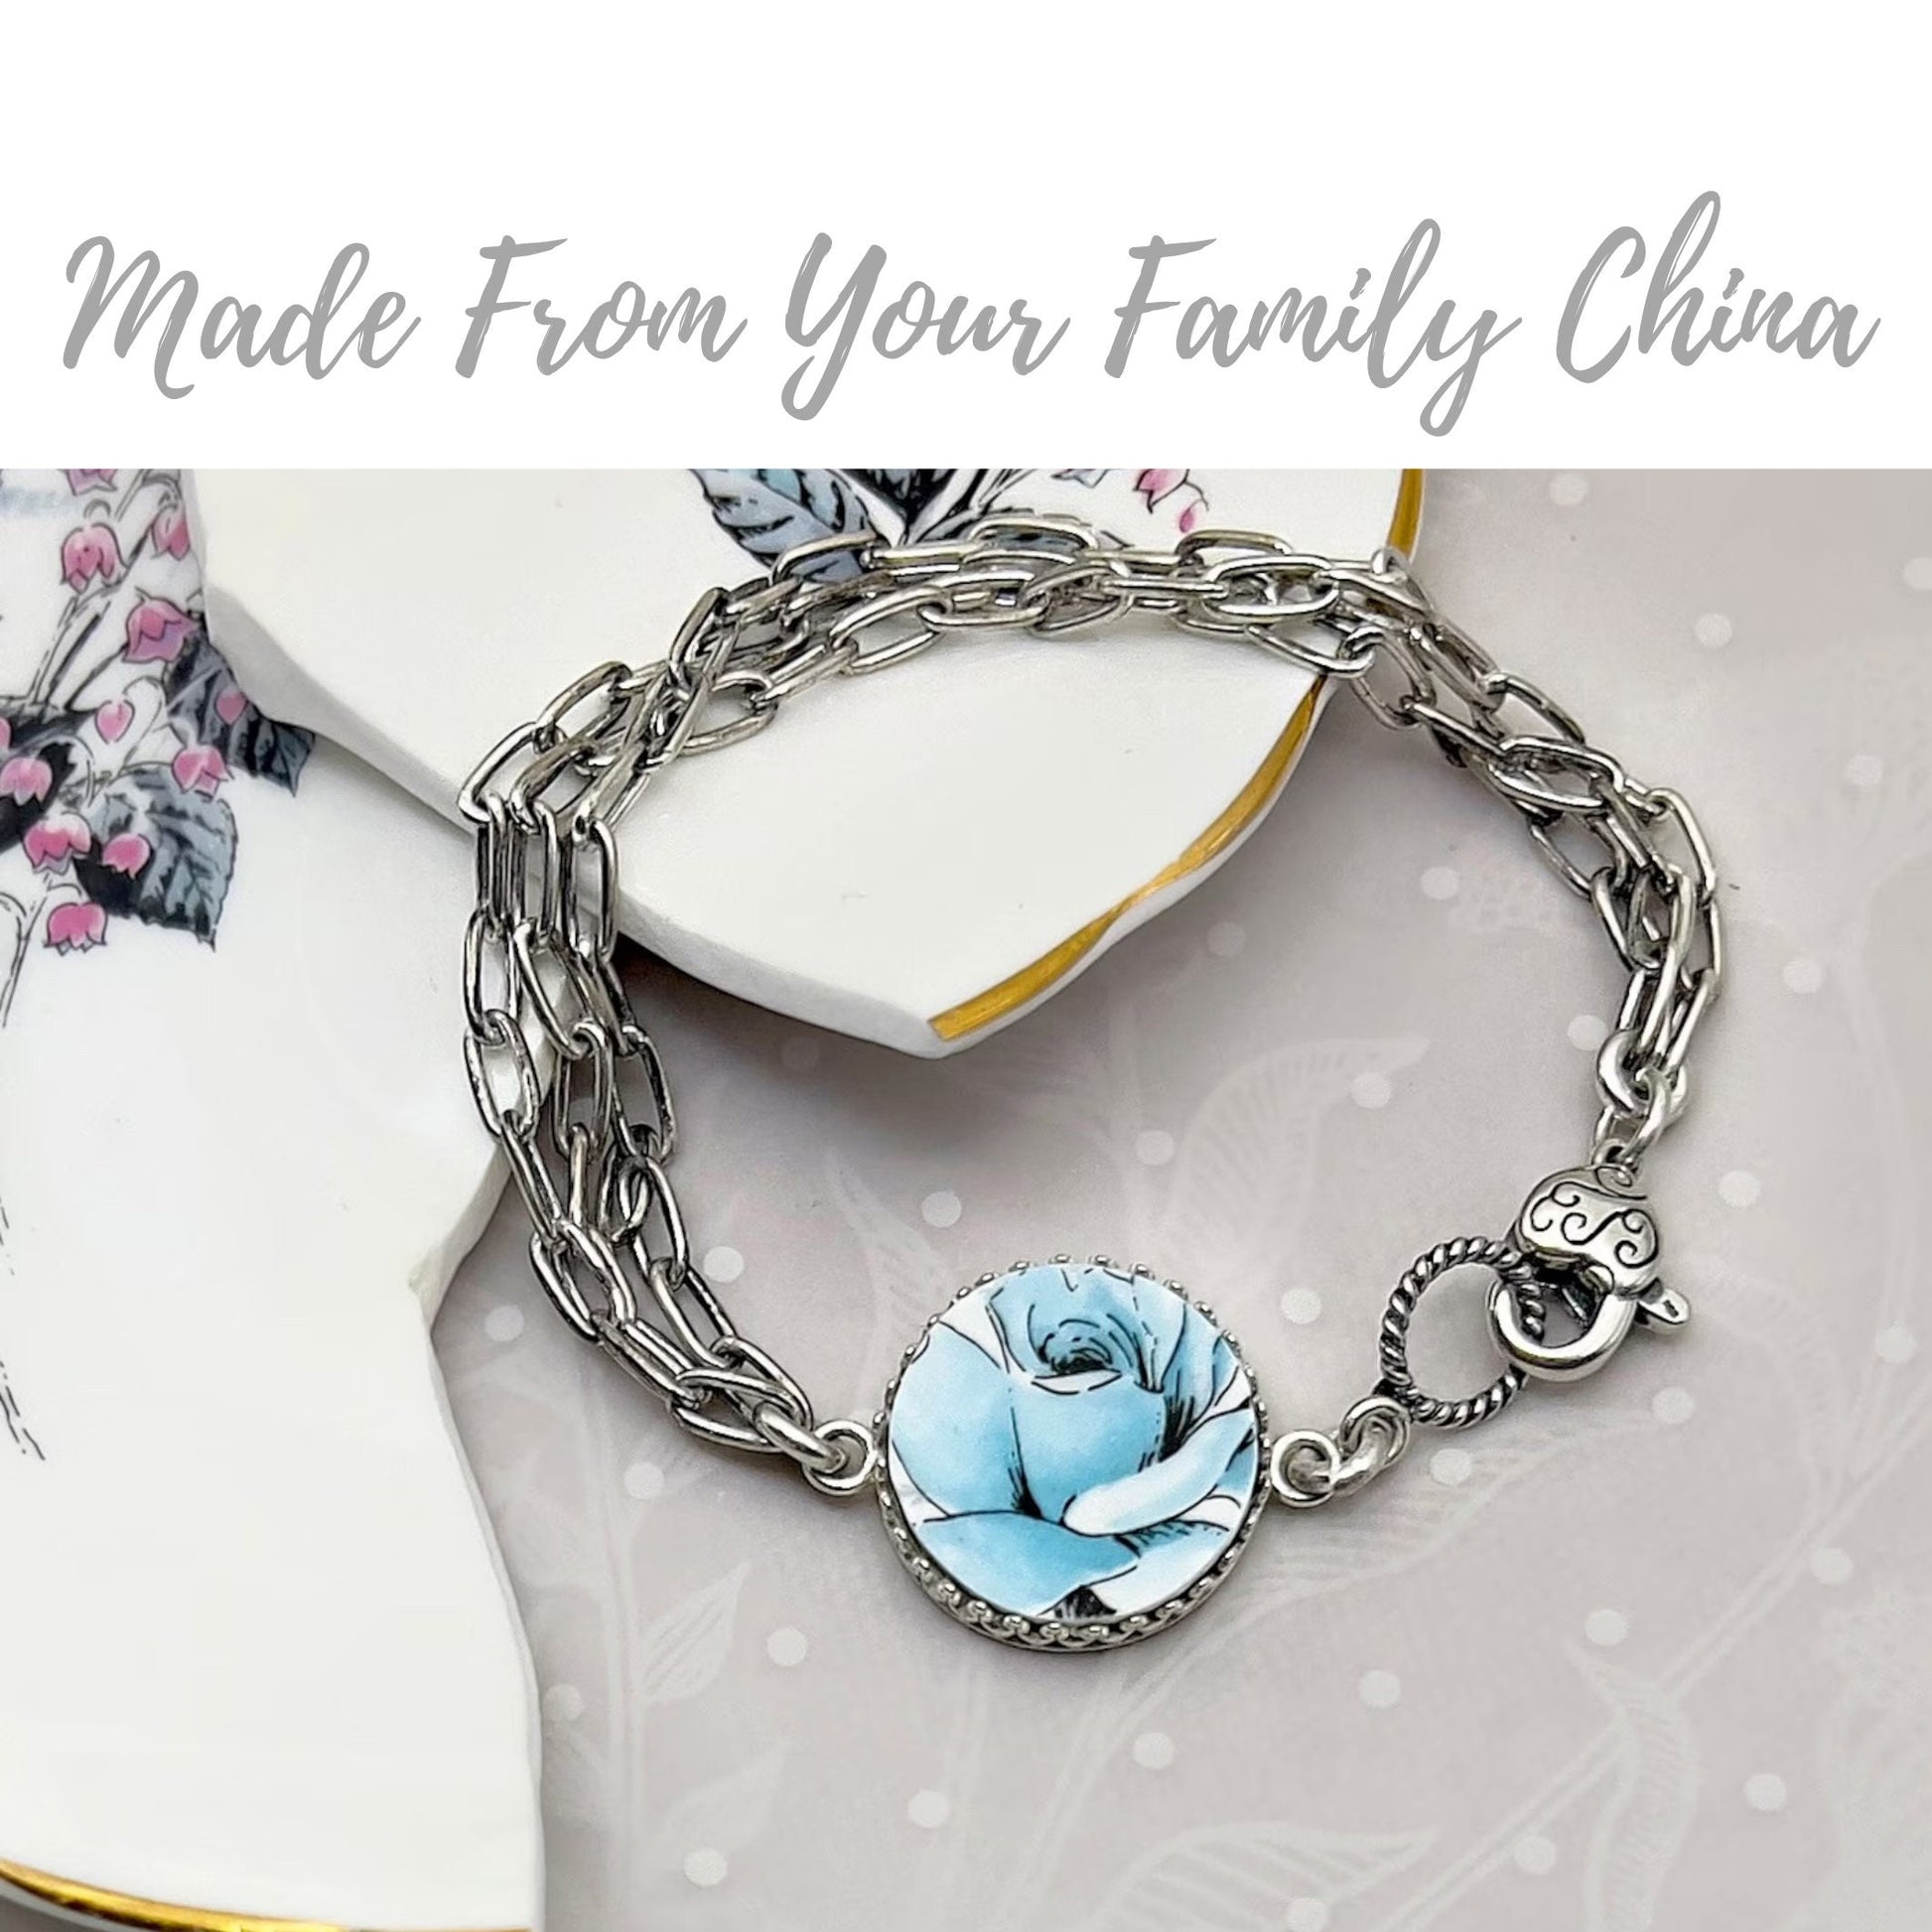 CUSTOM ORDER Silver Chain Lobster Claw China Bracelet, Memorial Broken China Jewelry, Mom Gift, Custom Family Jewelry, Made From Your China